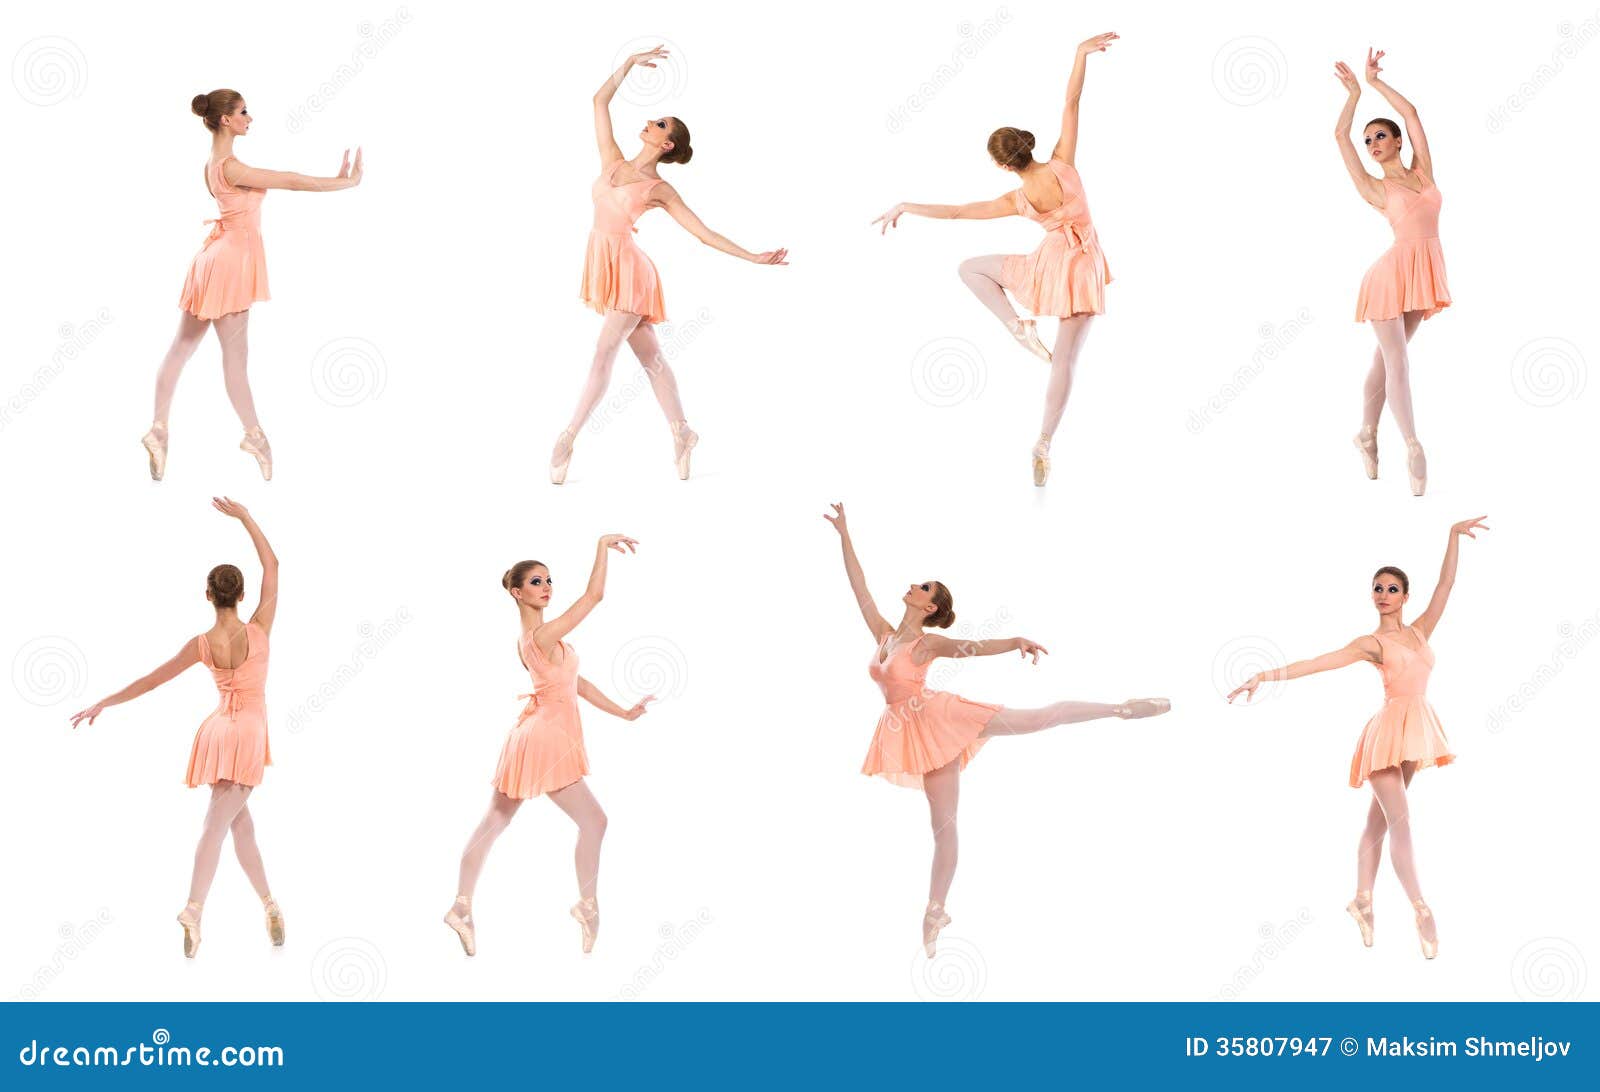 P2U: Ballet poses by sionra on DeviantArt